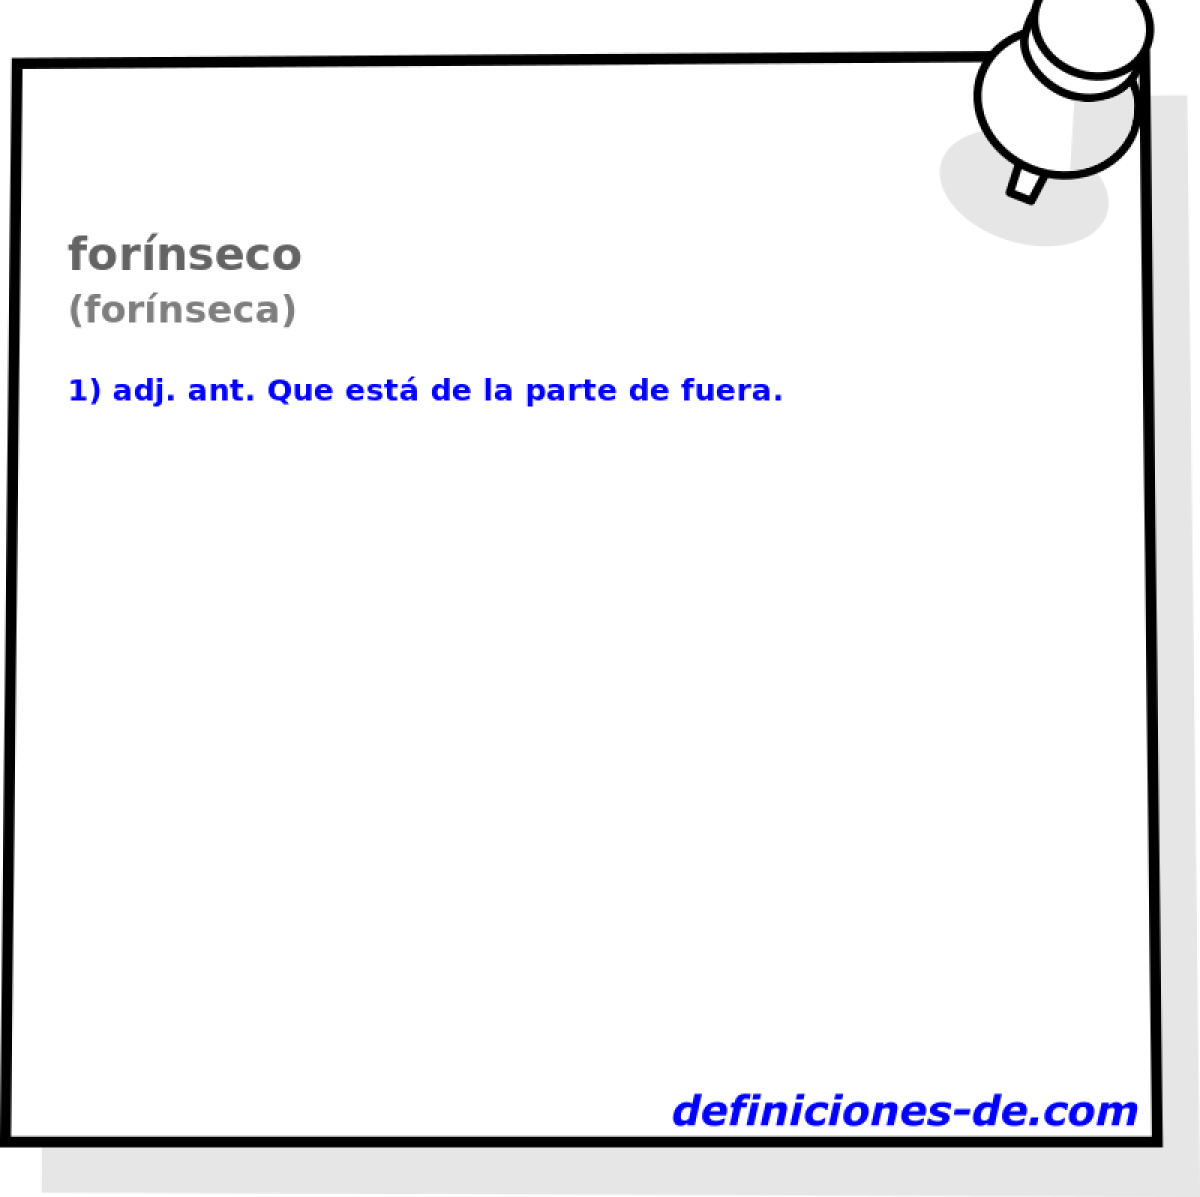 fornseco (fornseca)